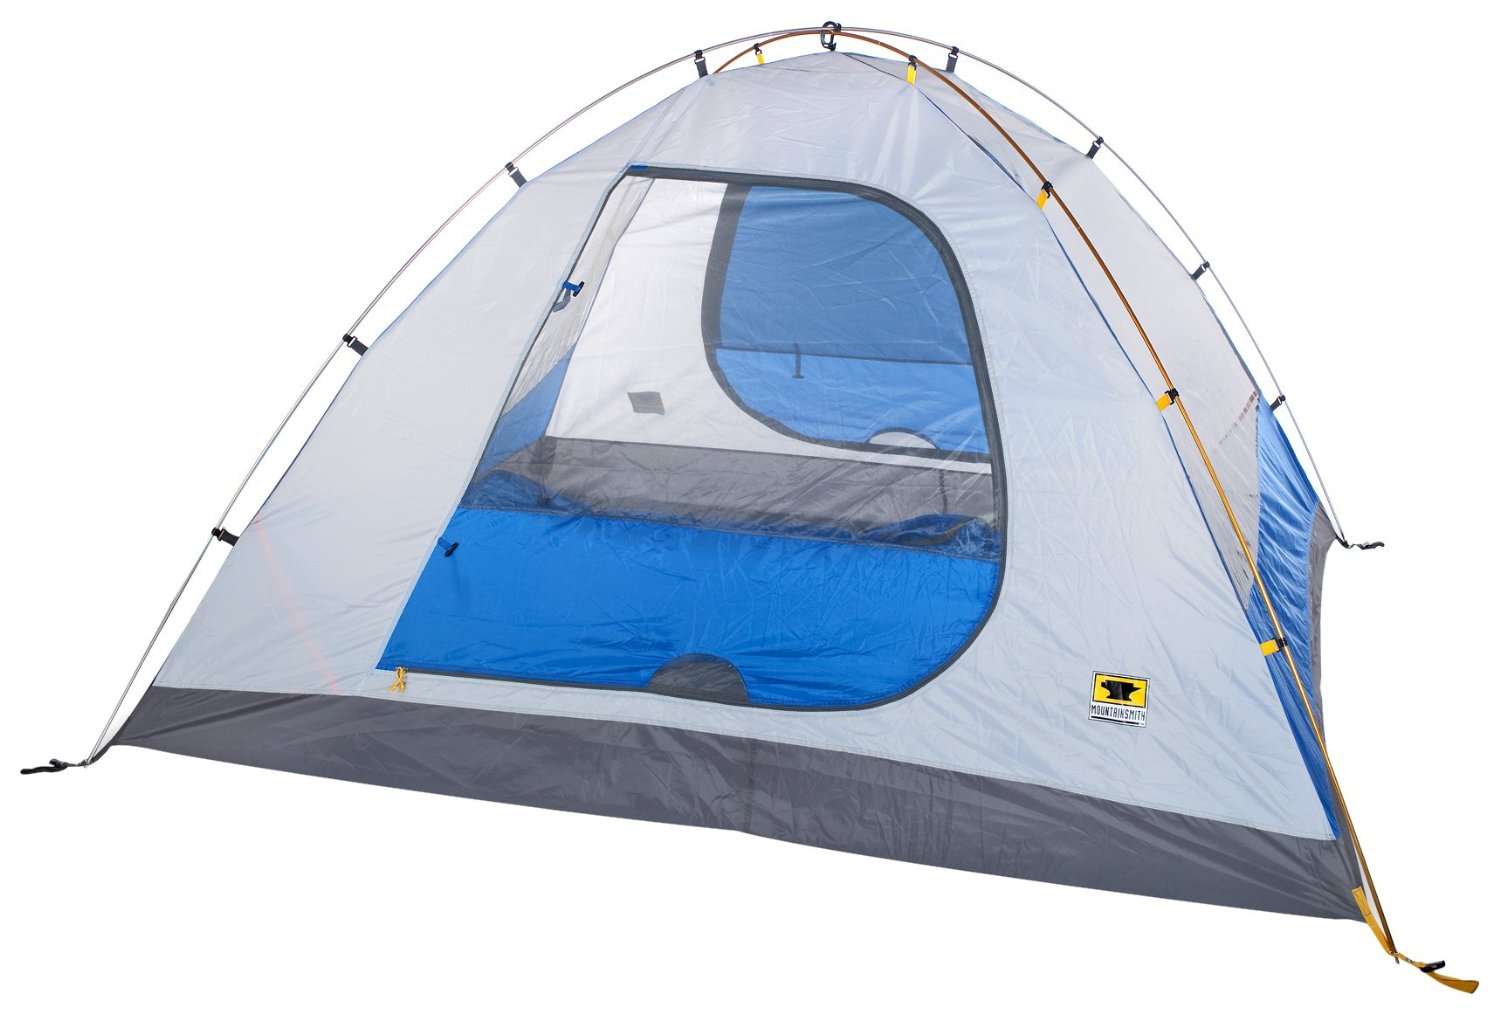 Top 10 Best Backpacking Tents